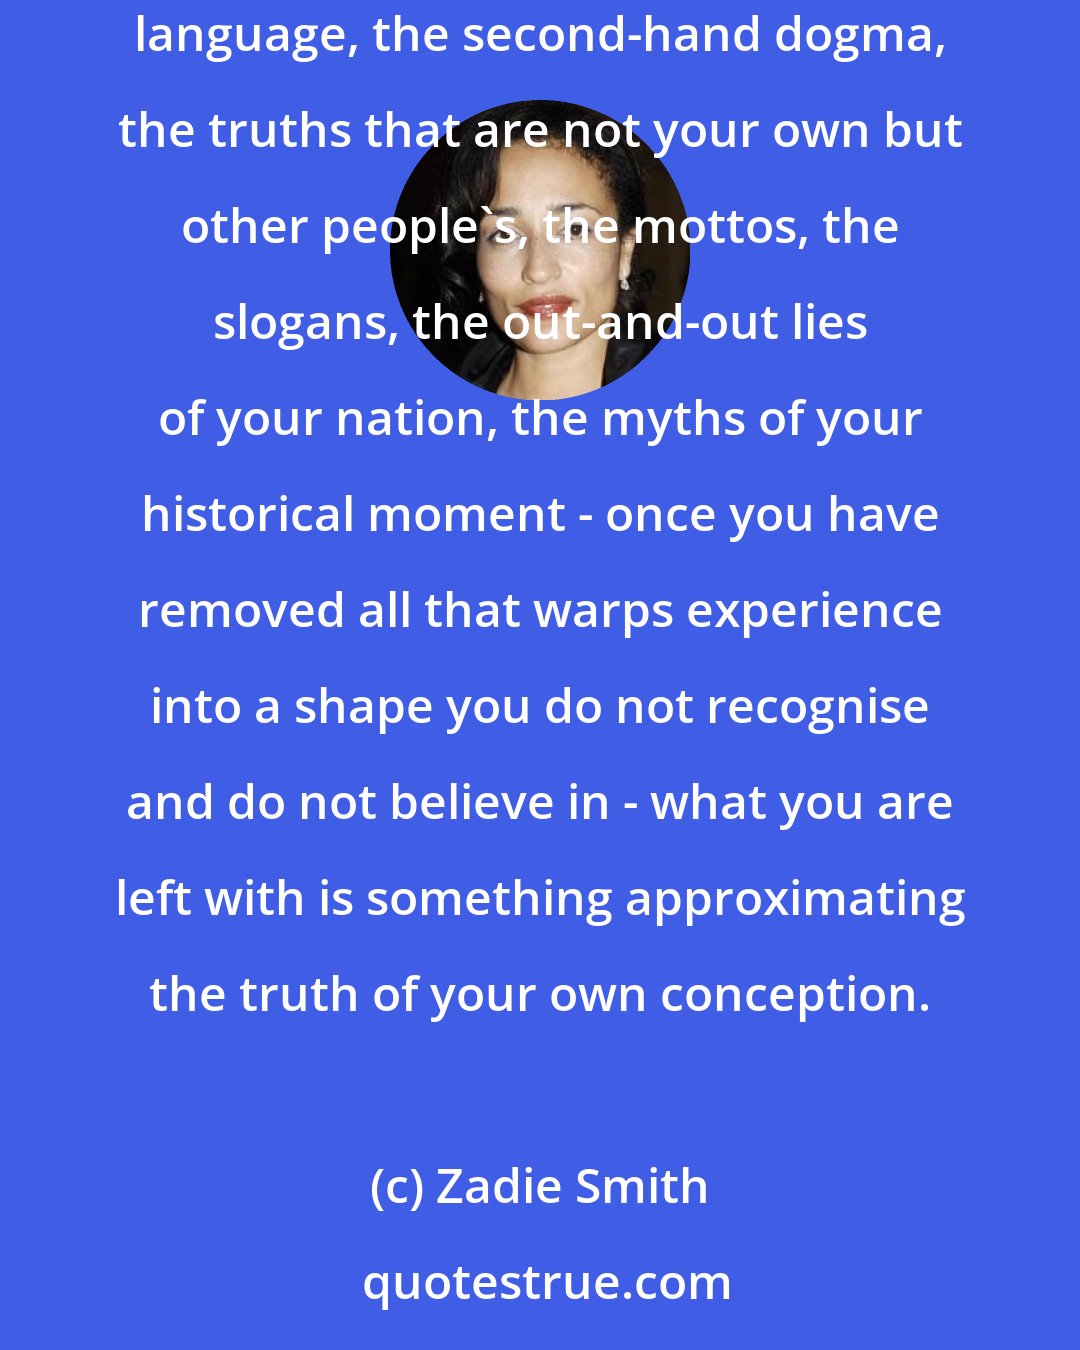 Zadie Smith: When I write I am trying to express my way of being in the world. This is primarily a process of elimination: once you have removed all the dead language, the second-hand dogma, the truths that are not your own but other people's, the mottos, the slogans, the out-and-out lies of your nation, the myths of your historical moment - once you have removed all that warps experience into a shape you do not recognise and do not believe in - what you are left with is something approximating the truth of your own conception.